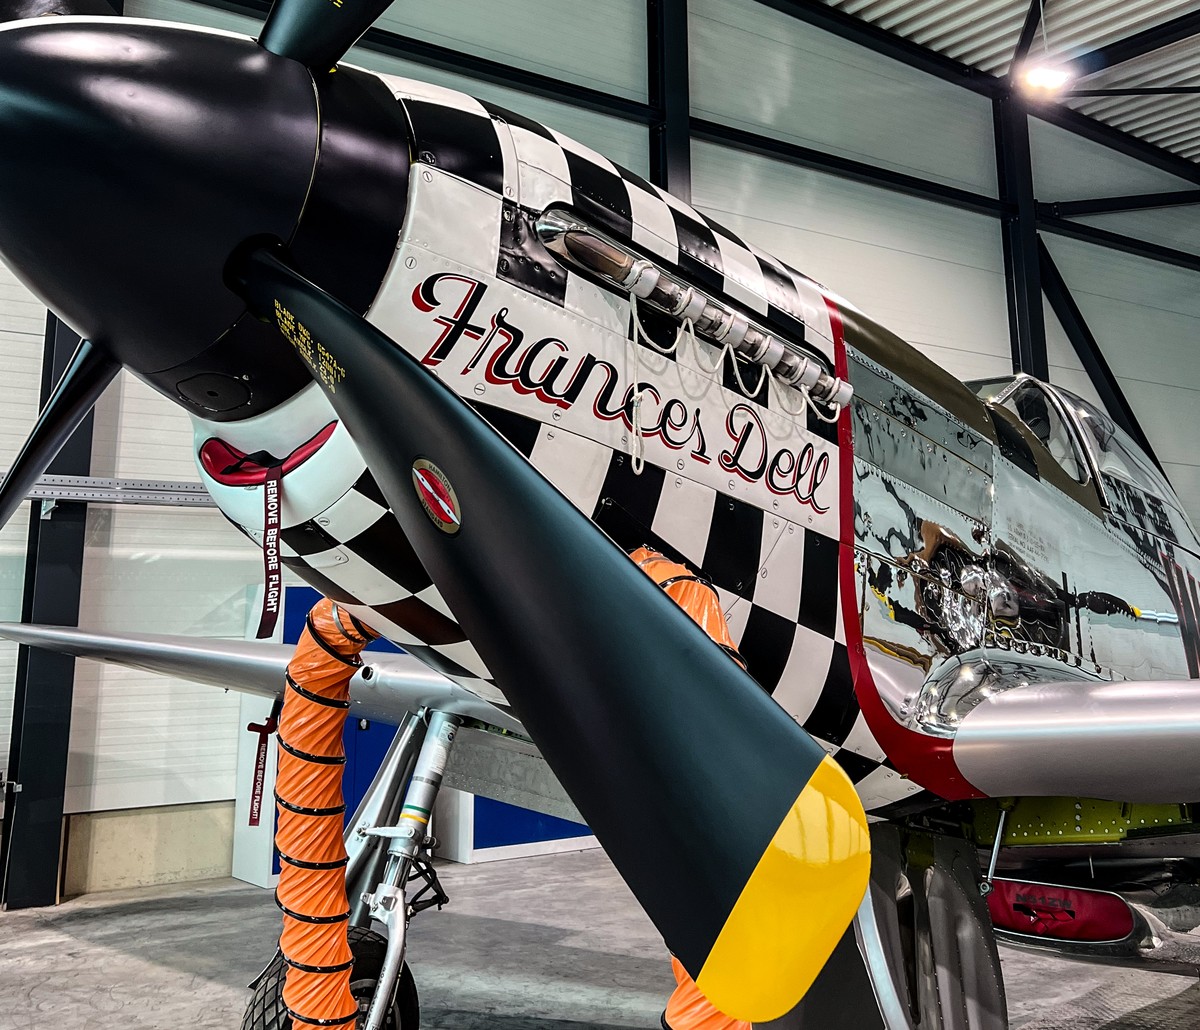 North Armerican P-25 Mustang "Frances Dell"